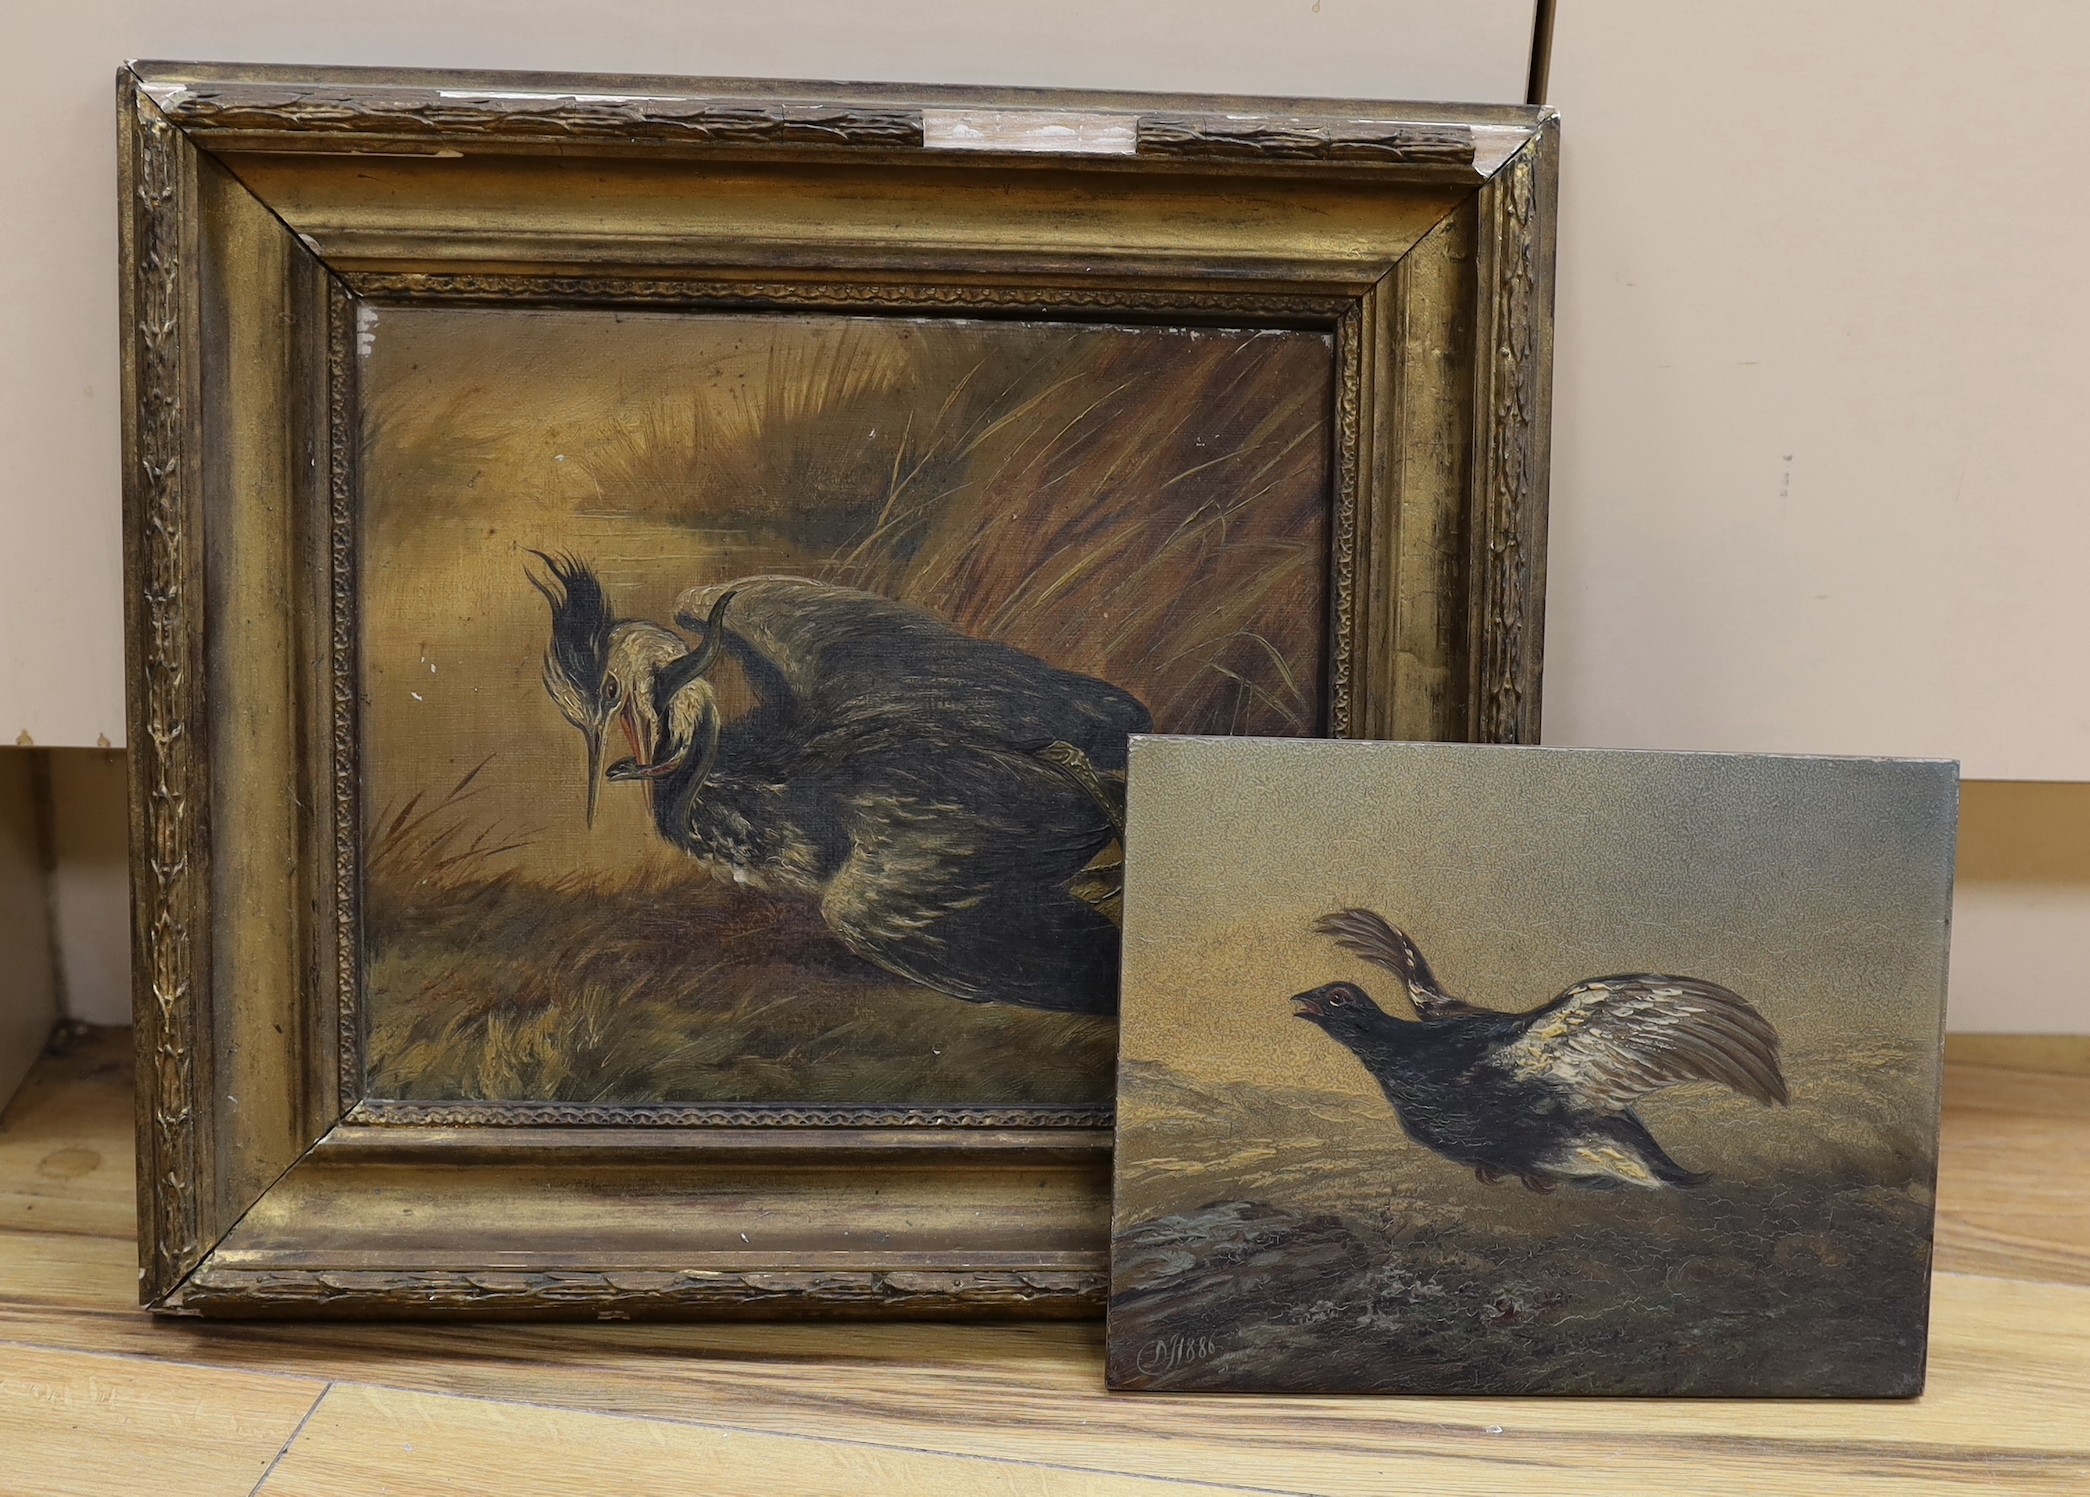 DJS 1886, two oils on canvas, Heron catching an eel and ptarmigan in flight, monogrammed and dated 1886, 24 x 29cm and 20 x 25cm, latter unframed